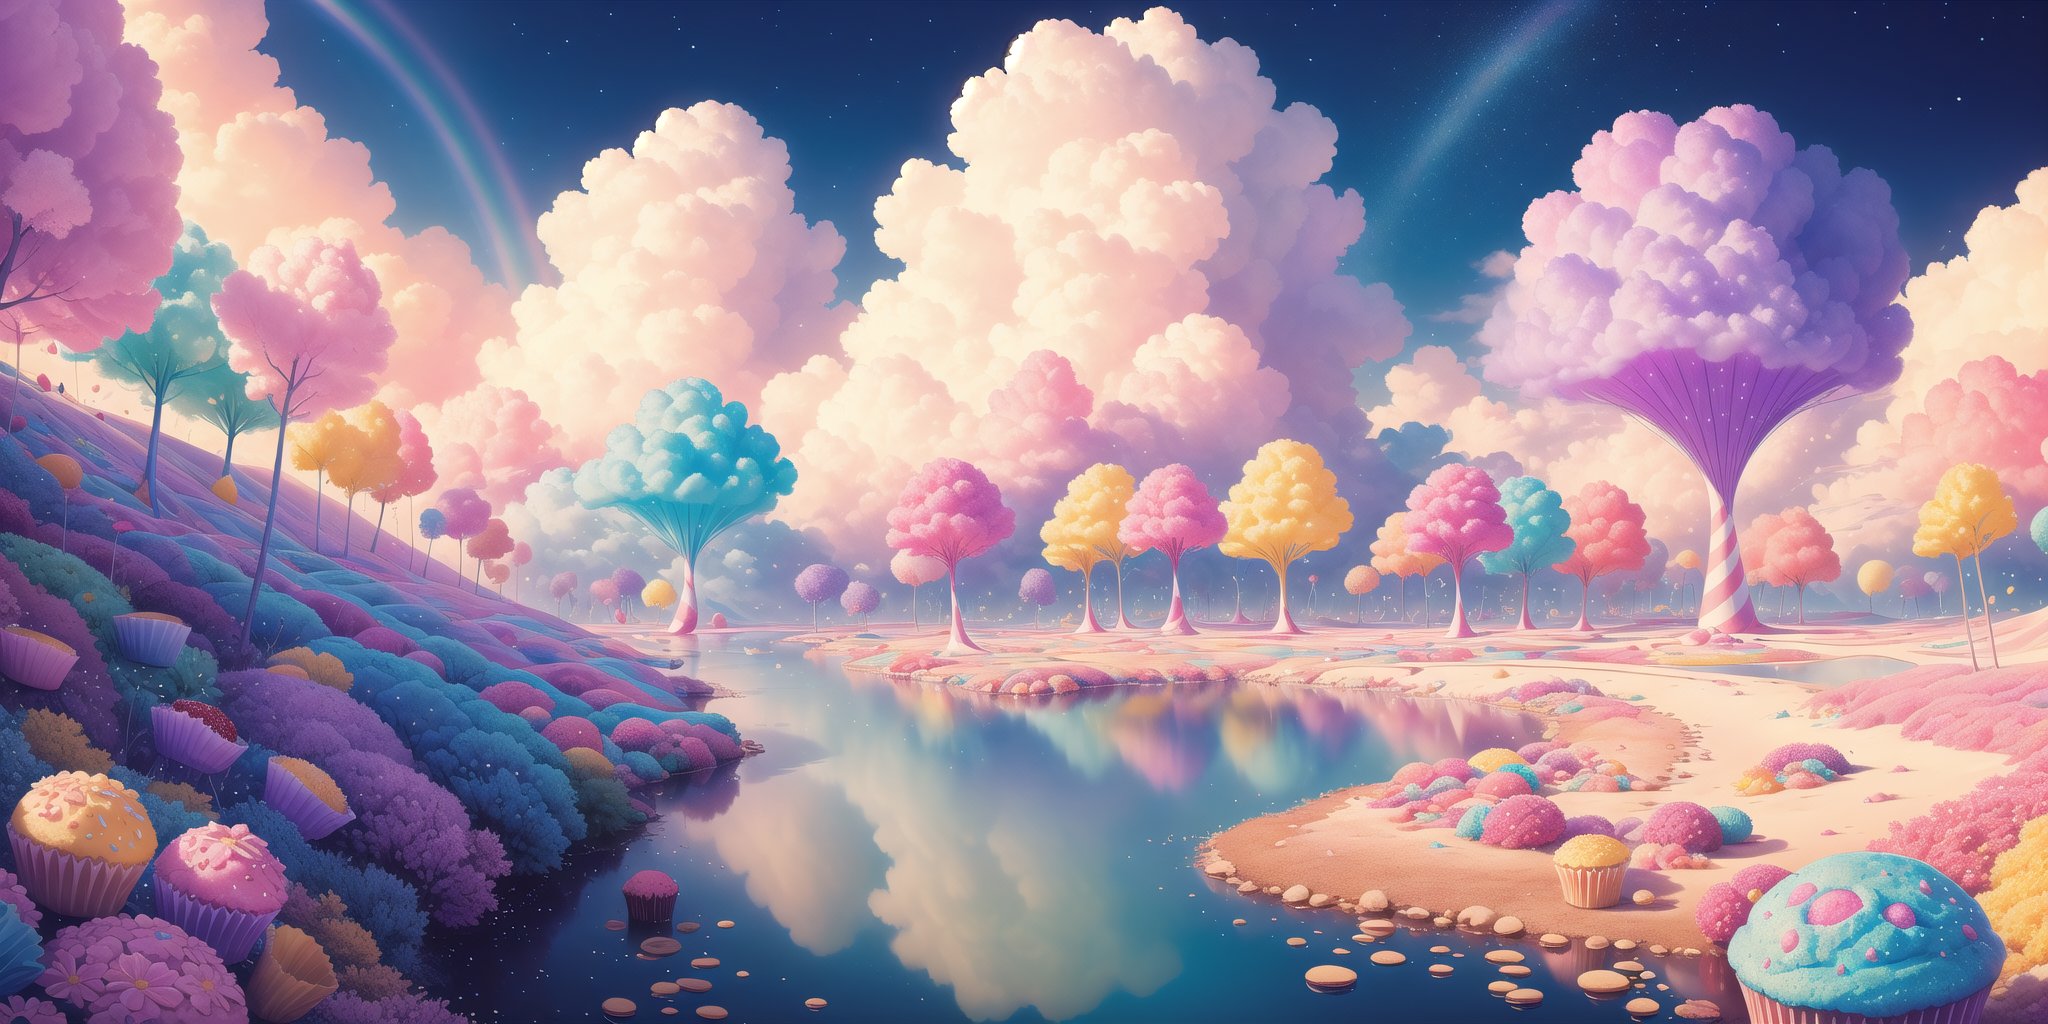 (masterpiece,  best quality:1.2),  8k,  top quality,  cryptids,  cookie,  (sugar,  glitter),  rainbow,  glowing,  digital illustration,  insaneres,  surreal,  (panoramic view),  cinematic,  ultra-detailed wallpaper,  intricate details,  island of dreams,  [above the clouds,  floating] raytracing,  (blending),  in the style of pixar,  cloud,  cotton candy,  whipped cream,  dream,  fantastic lighting and composition,  fruit,  colorful,  vivid,  a world made of candy,  plant,  scenery,  full background,  (cupcake:1.2),  highly detailed,  3d,  beautiful,  personification,  deep depth of field,  adorable,  cute,  (gradients),  sweet,  shiny,  delicious,  bloom,  volumetric lighting,  (fantasy),  candyland,  candy,  see-through,  transparent,  (jello),  coral colors,  smooth,  extremely detailed, cryptids, (best quality, kawaiitech, rayearth, retro artstyle,<lora:EMS-179-EMS:0.200000>,<lora:EMS-8999-EMS:0.200000>,<lora:EMS-29836-EMS:0.100000>,<lora:EMS-27722-EMS:0.700000>